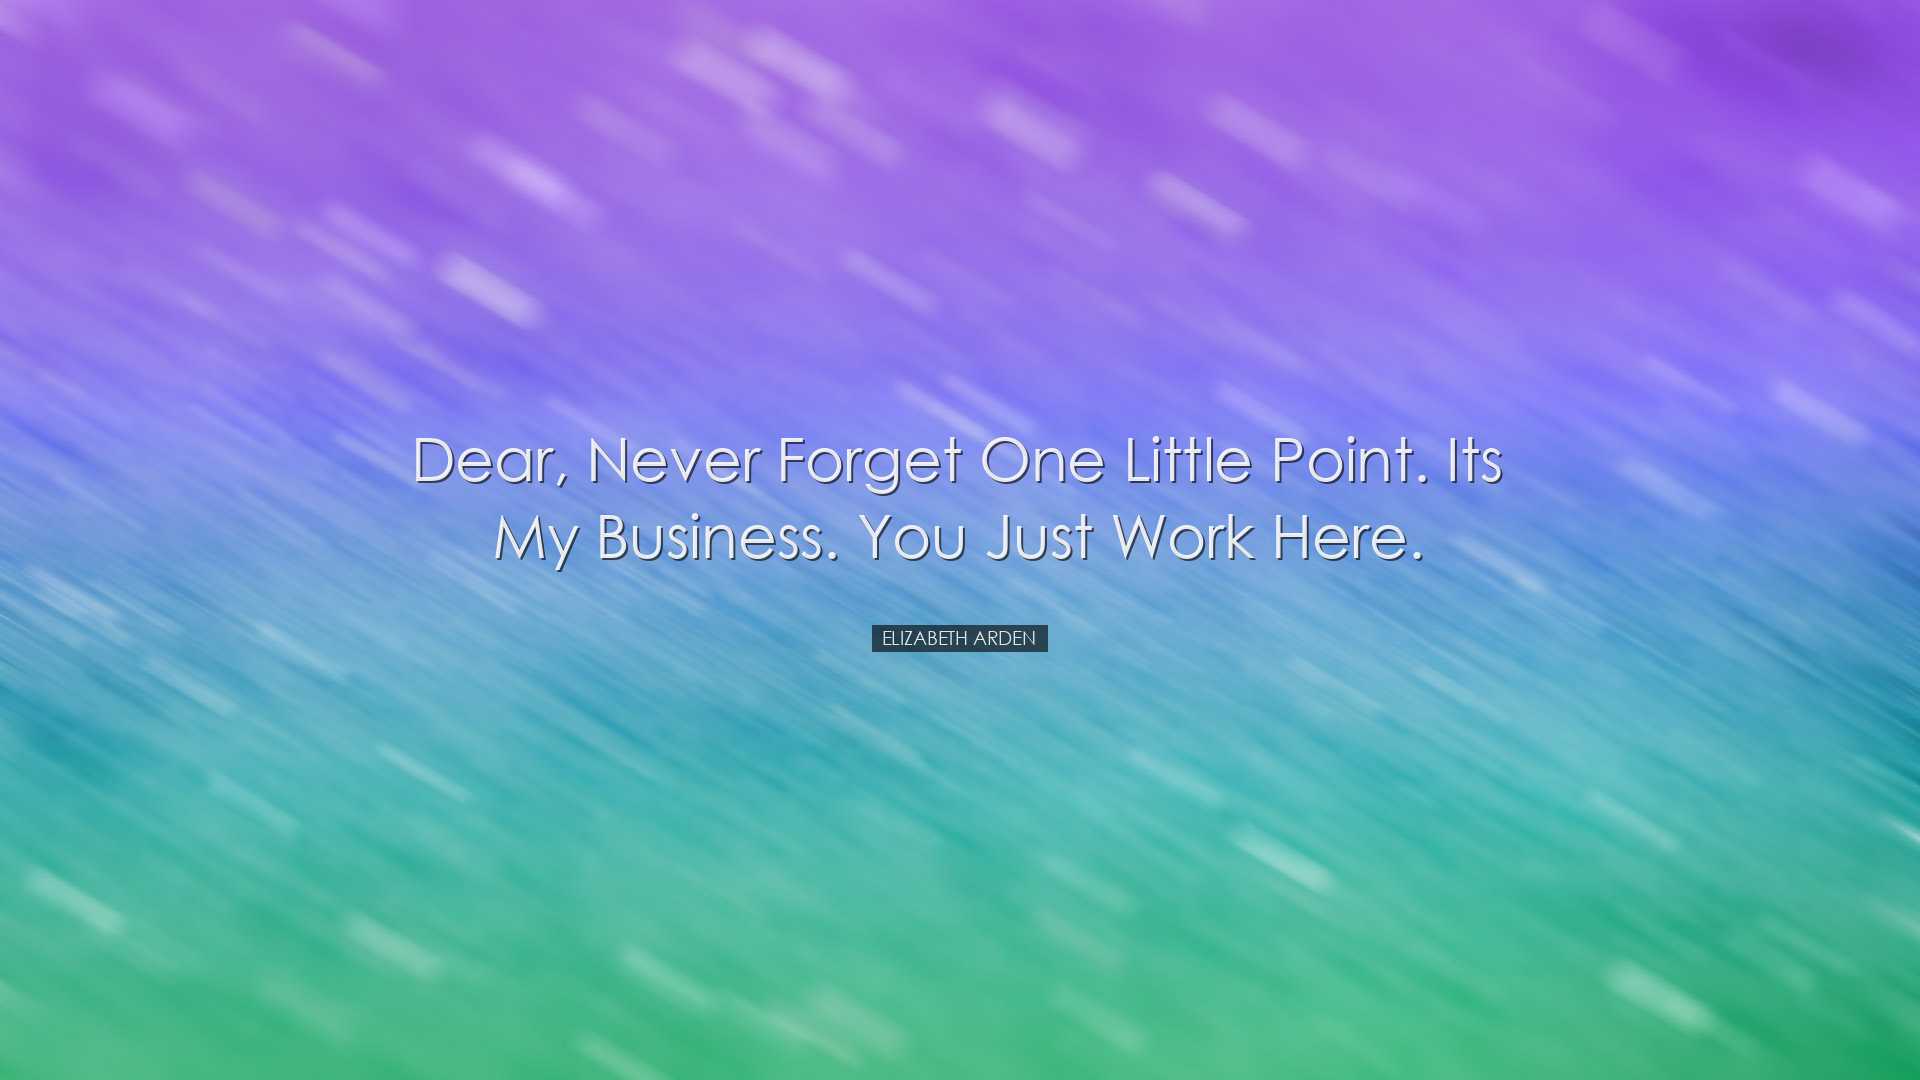 Dear, never forget one little point. Its my business. You just wor